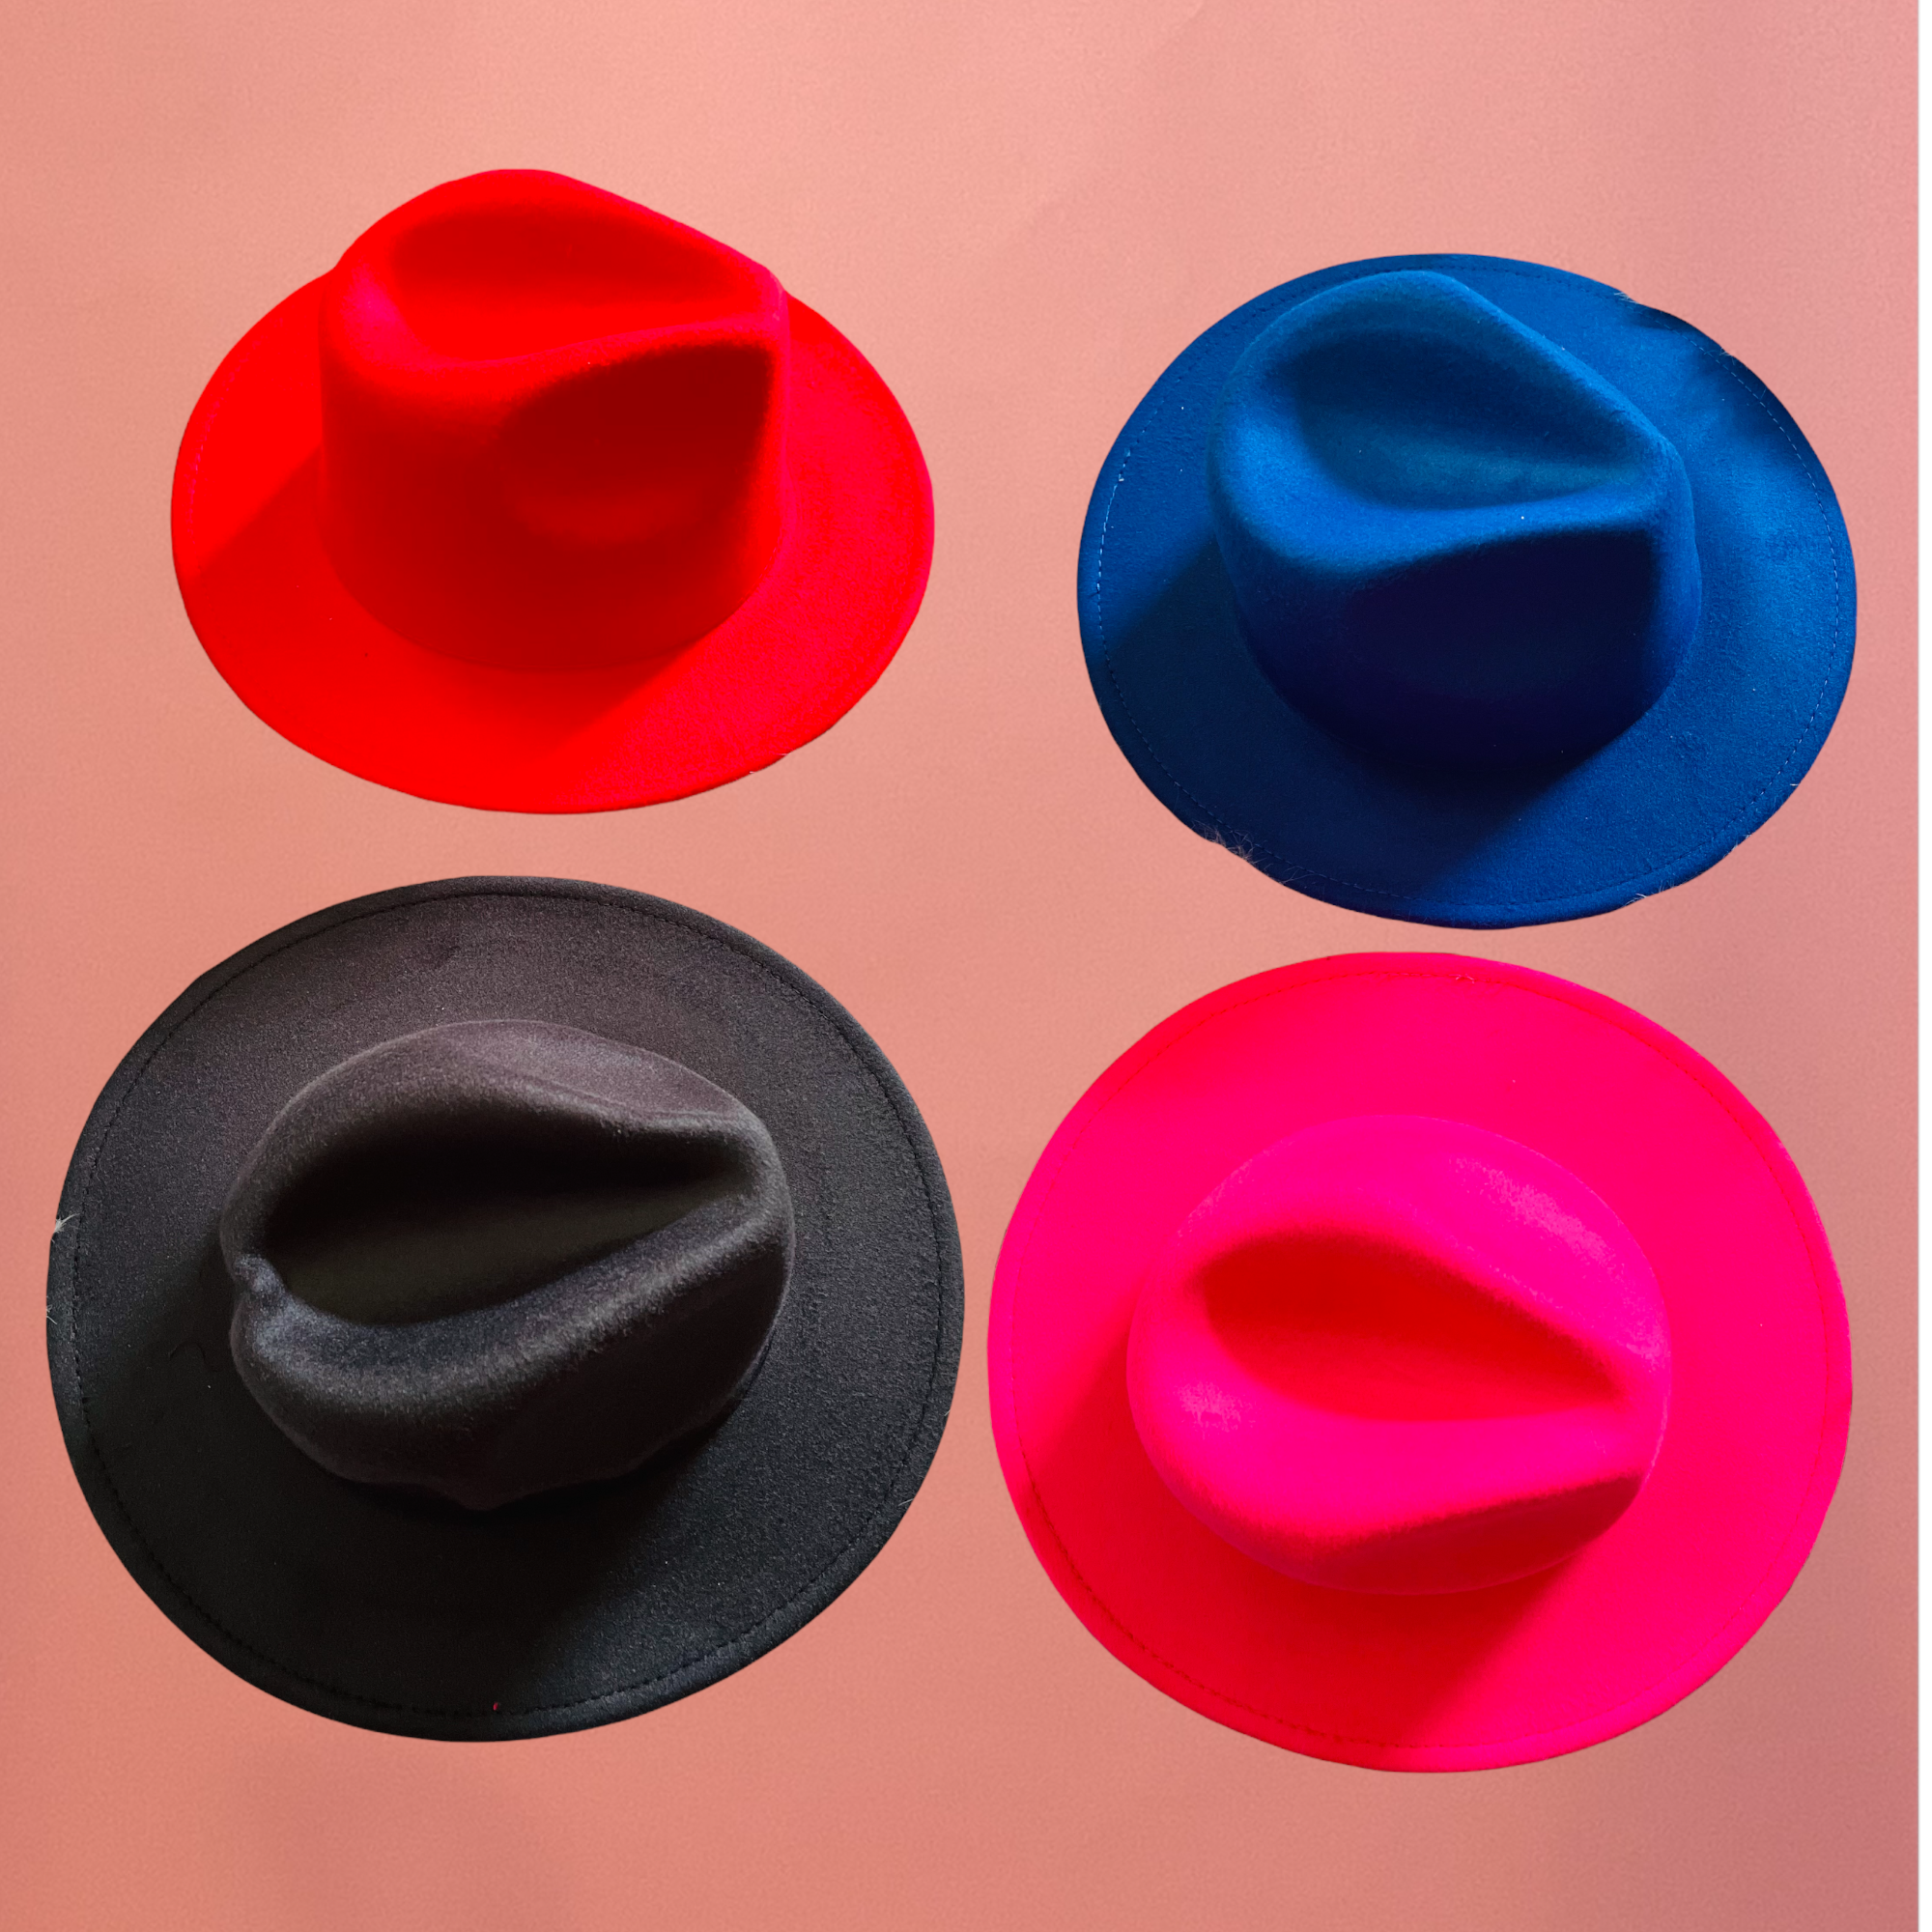 J. ELISE BOUTIQUE Stay on trend and turn heads in our wide brim accent red bottom fedora hats. Elevate any look from simple or basic to effortlessly stylish. Fedora Style Felt Hat with Bottom Accent Material: 65% cotton, 35% polyester Adjustable strap inside Hat Circumference: 56-58cm/22-22.8